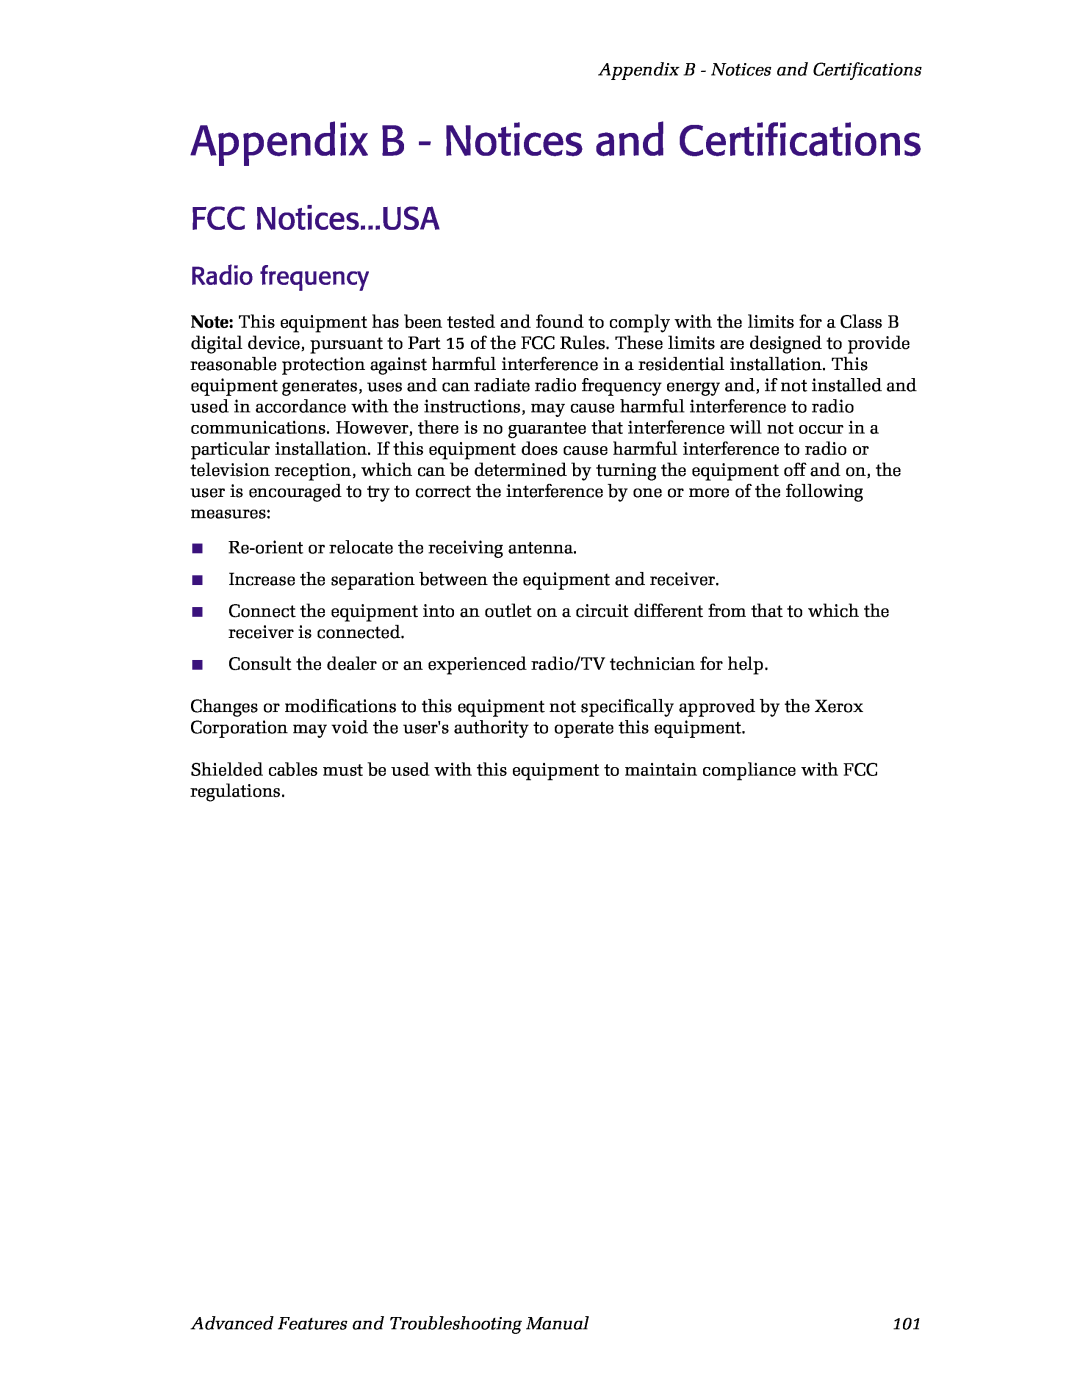 Xerox N4525 manual Appendix B - Notices and Certifications, FCC Notices...USA, Radio frequency 